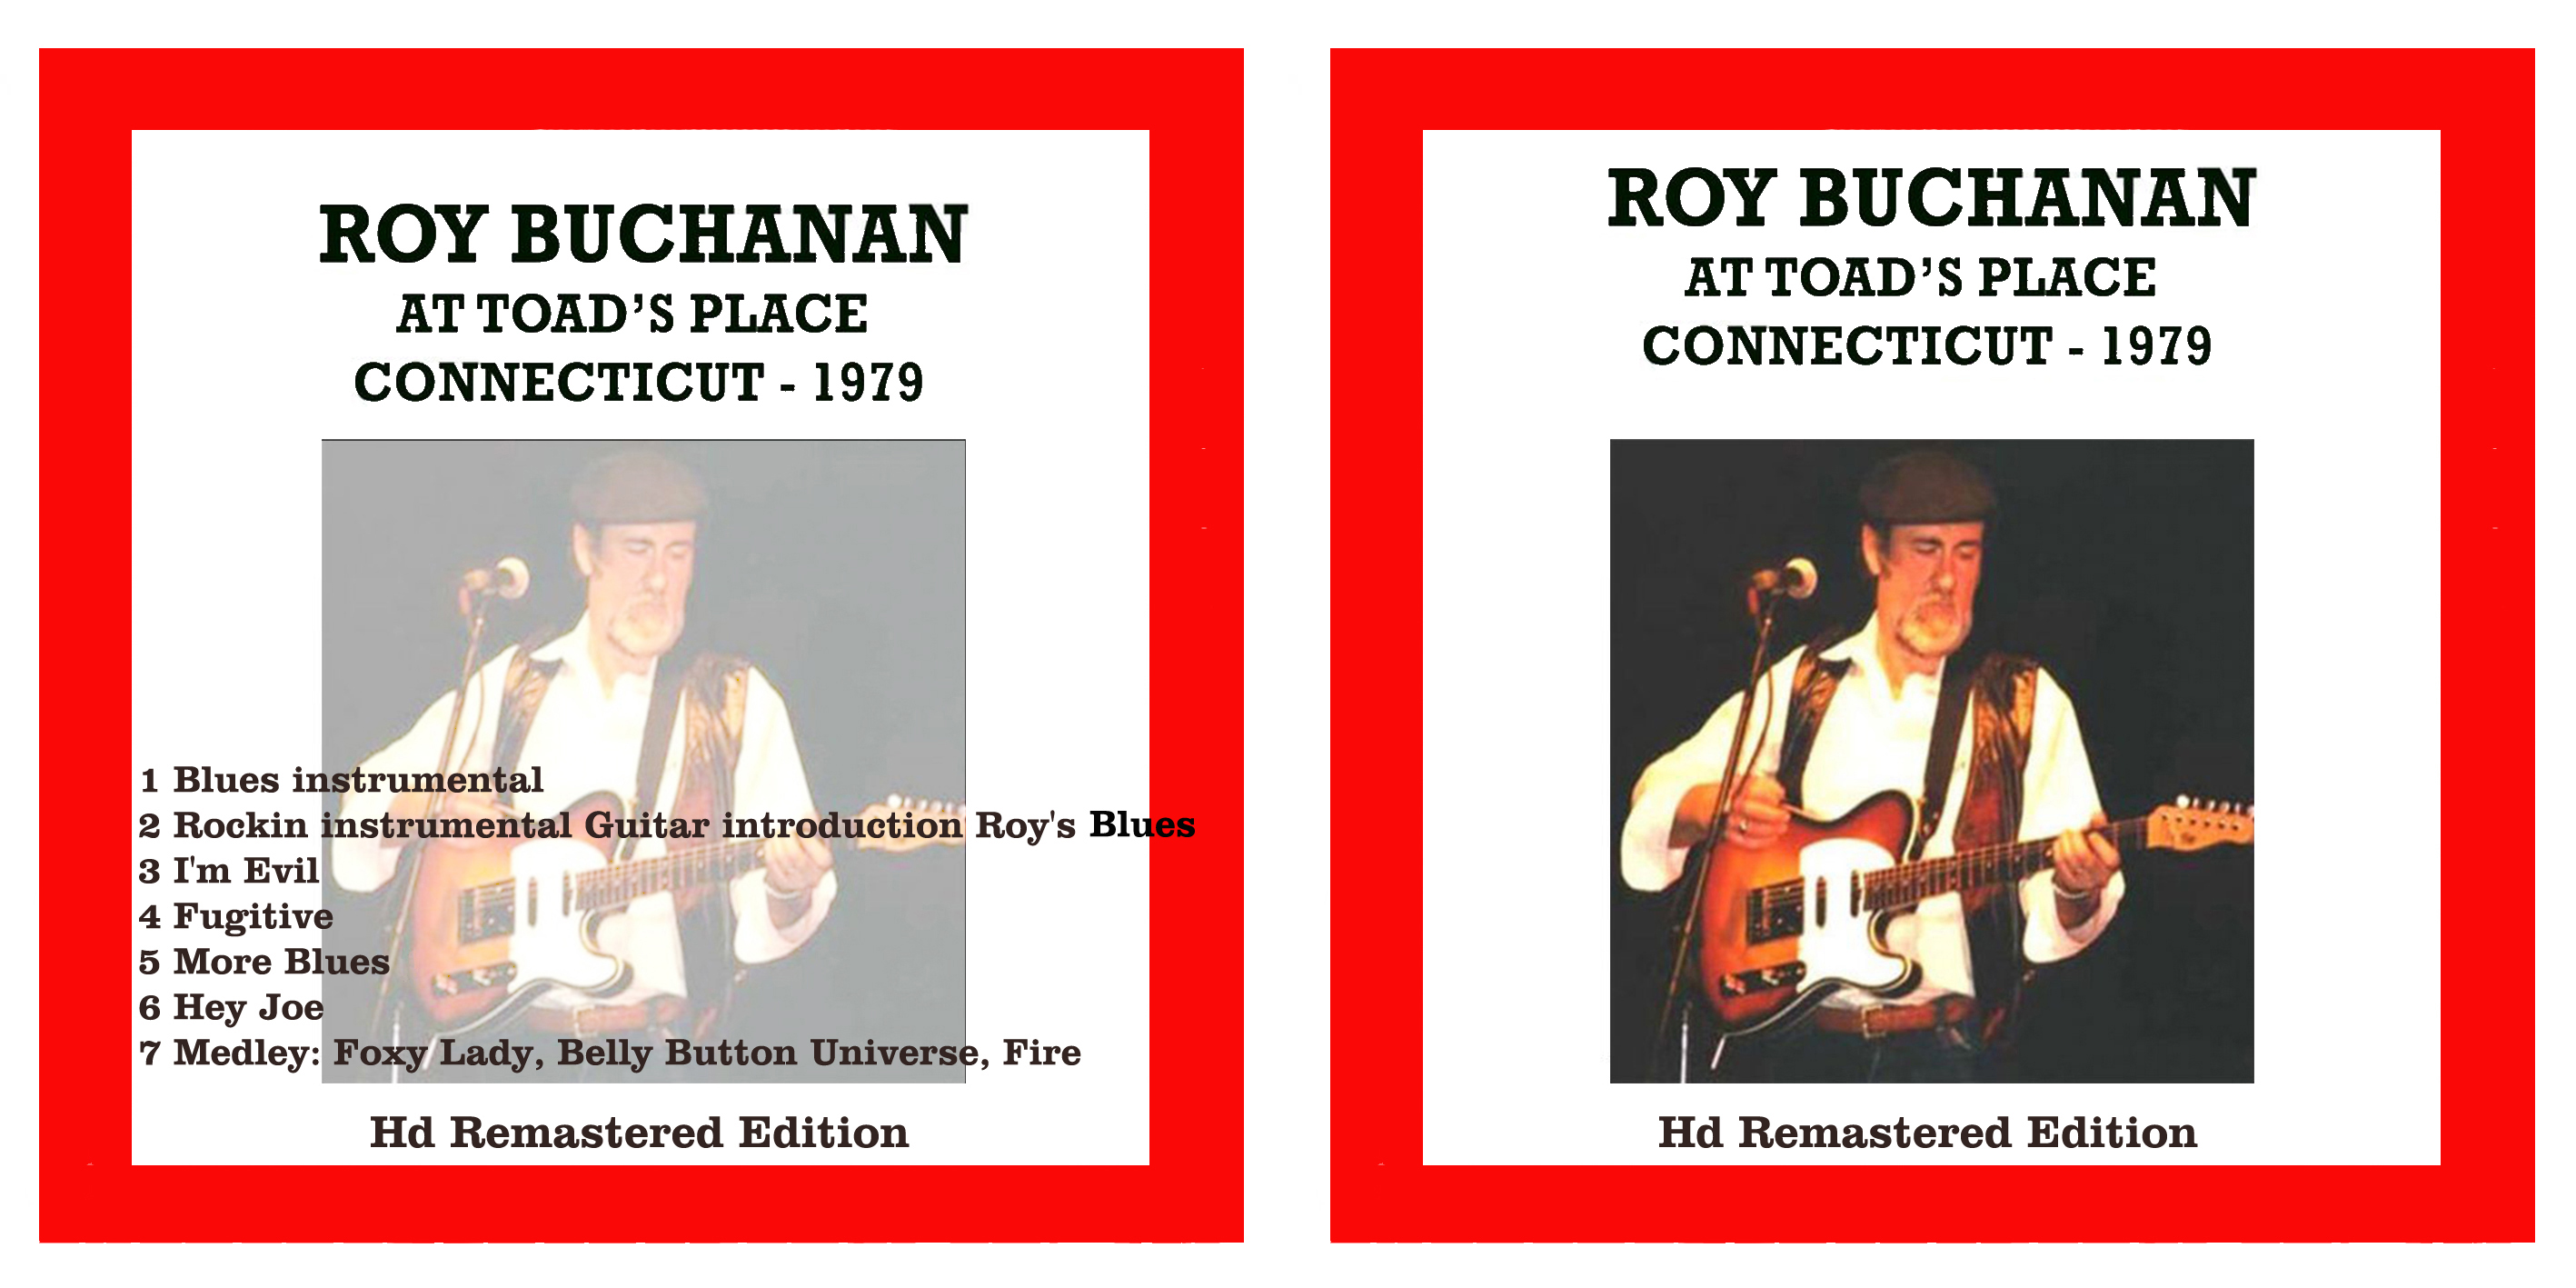 roy buchanan cdr toad's place connecticut 1979 cover out